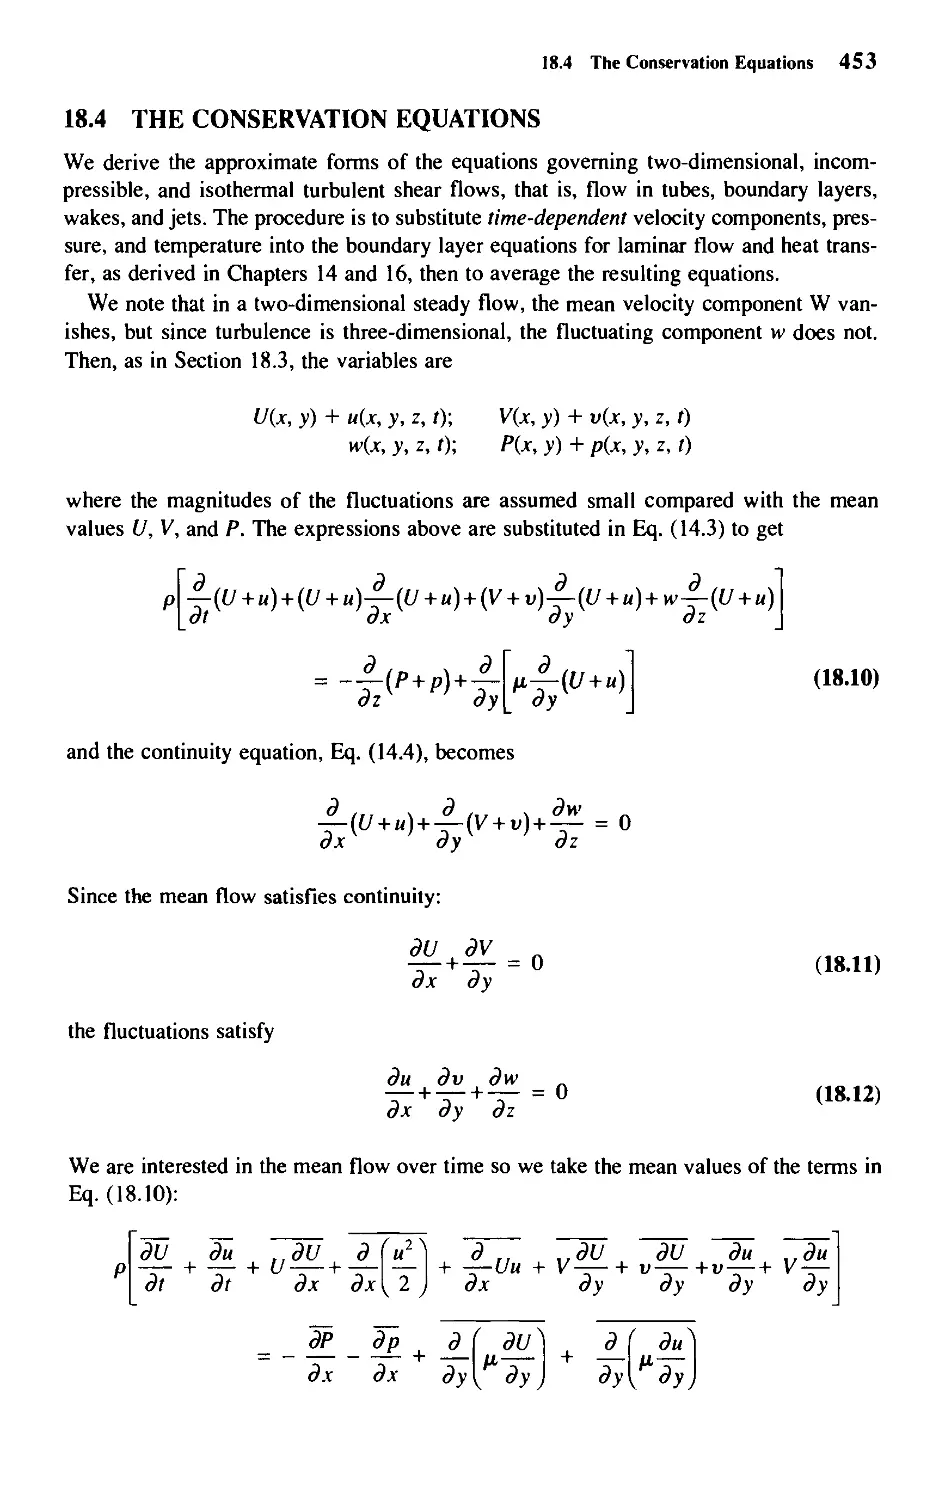 18.4 - The Conservation Equations